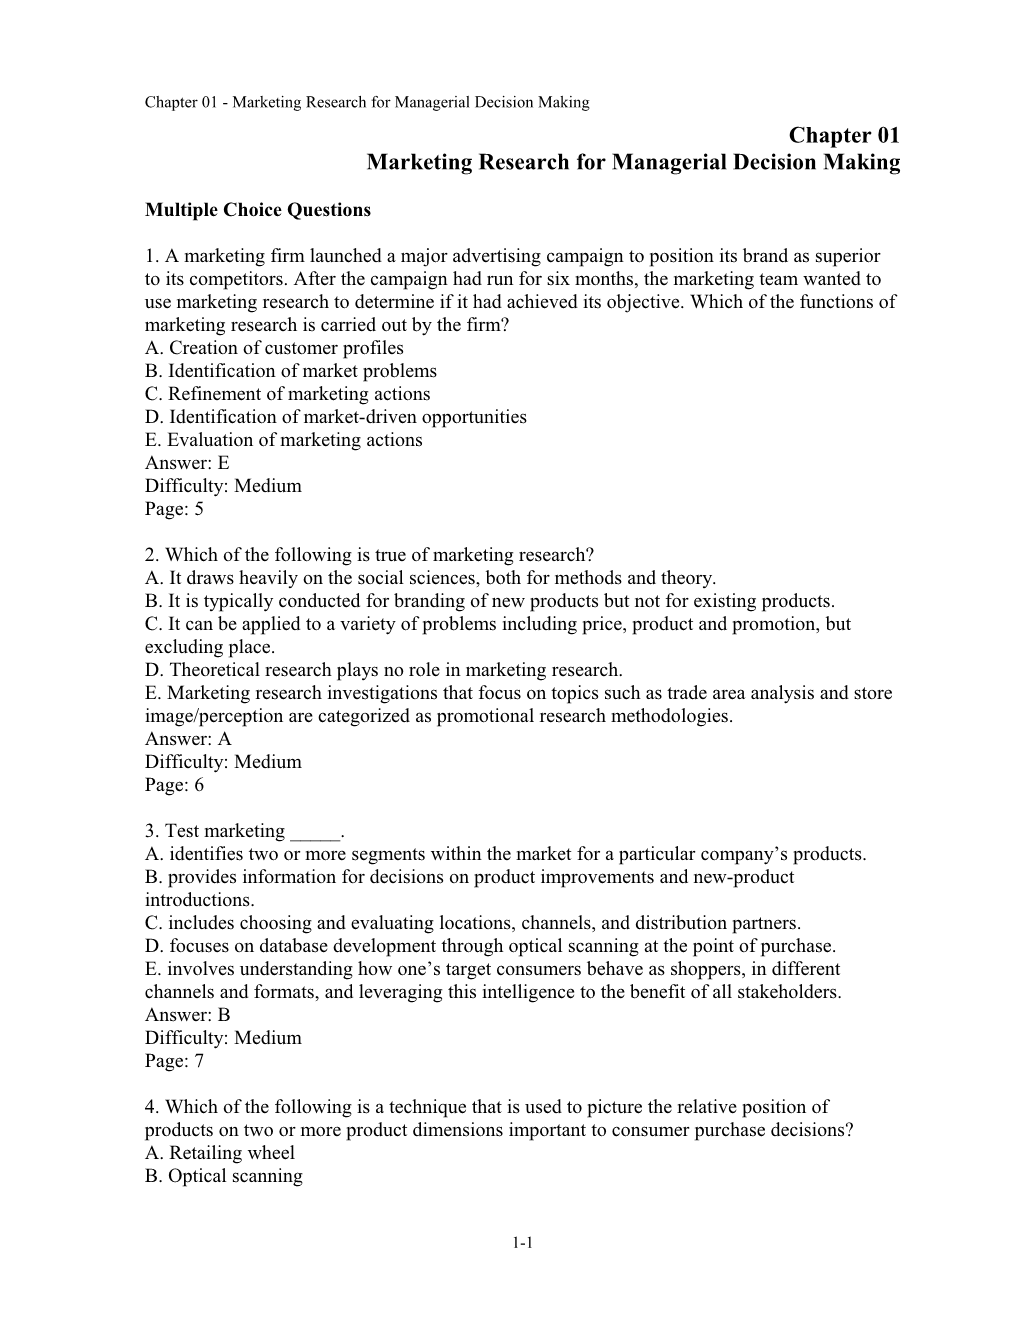 Chapter 01 Marketing Research for Managerial Decision Making